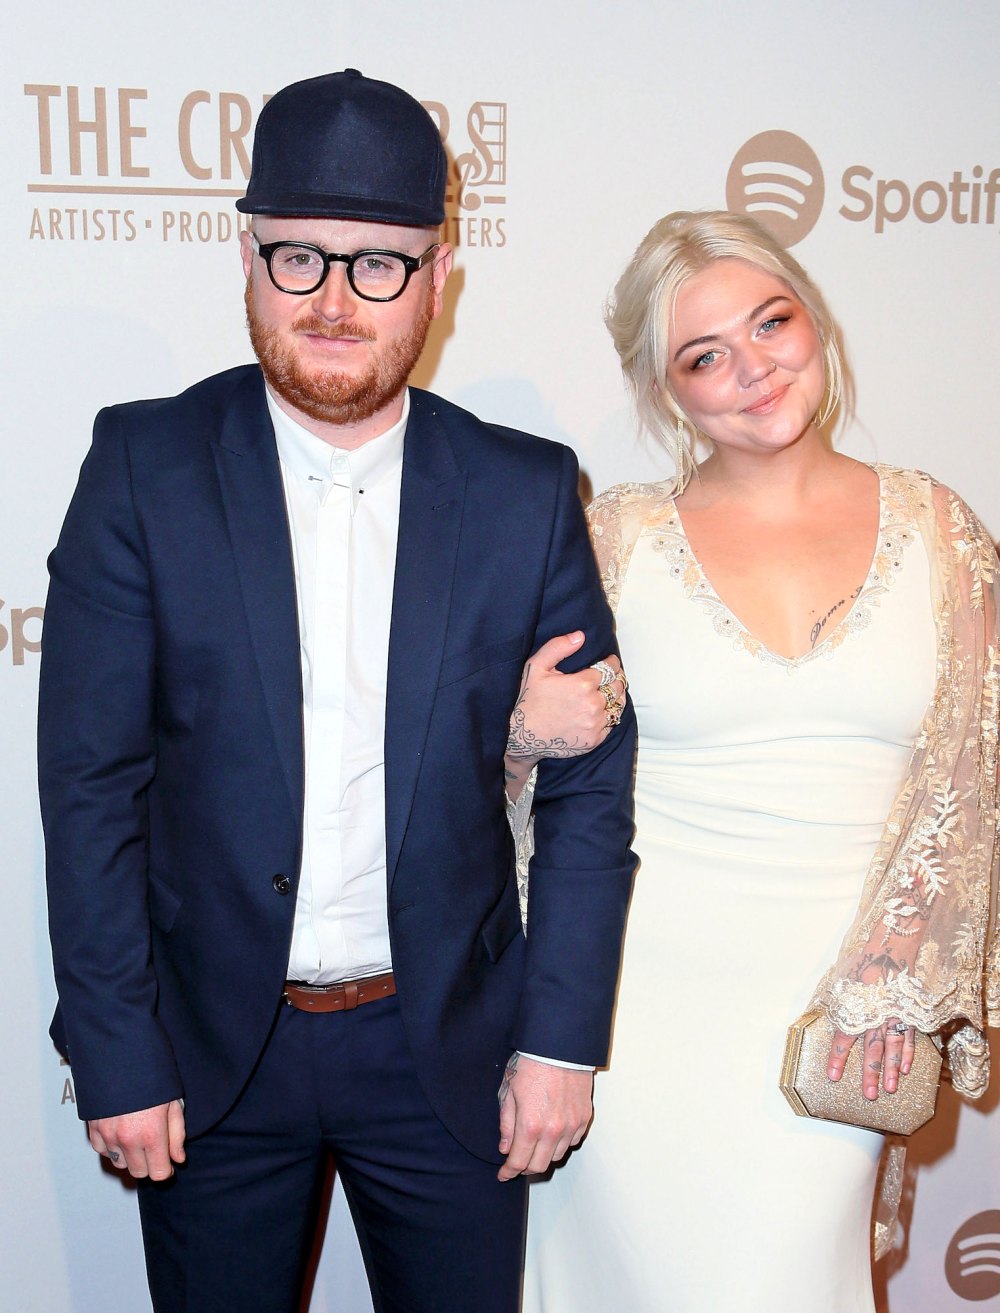 Elle King s Ups and Downs Throughout the Years